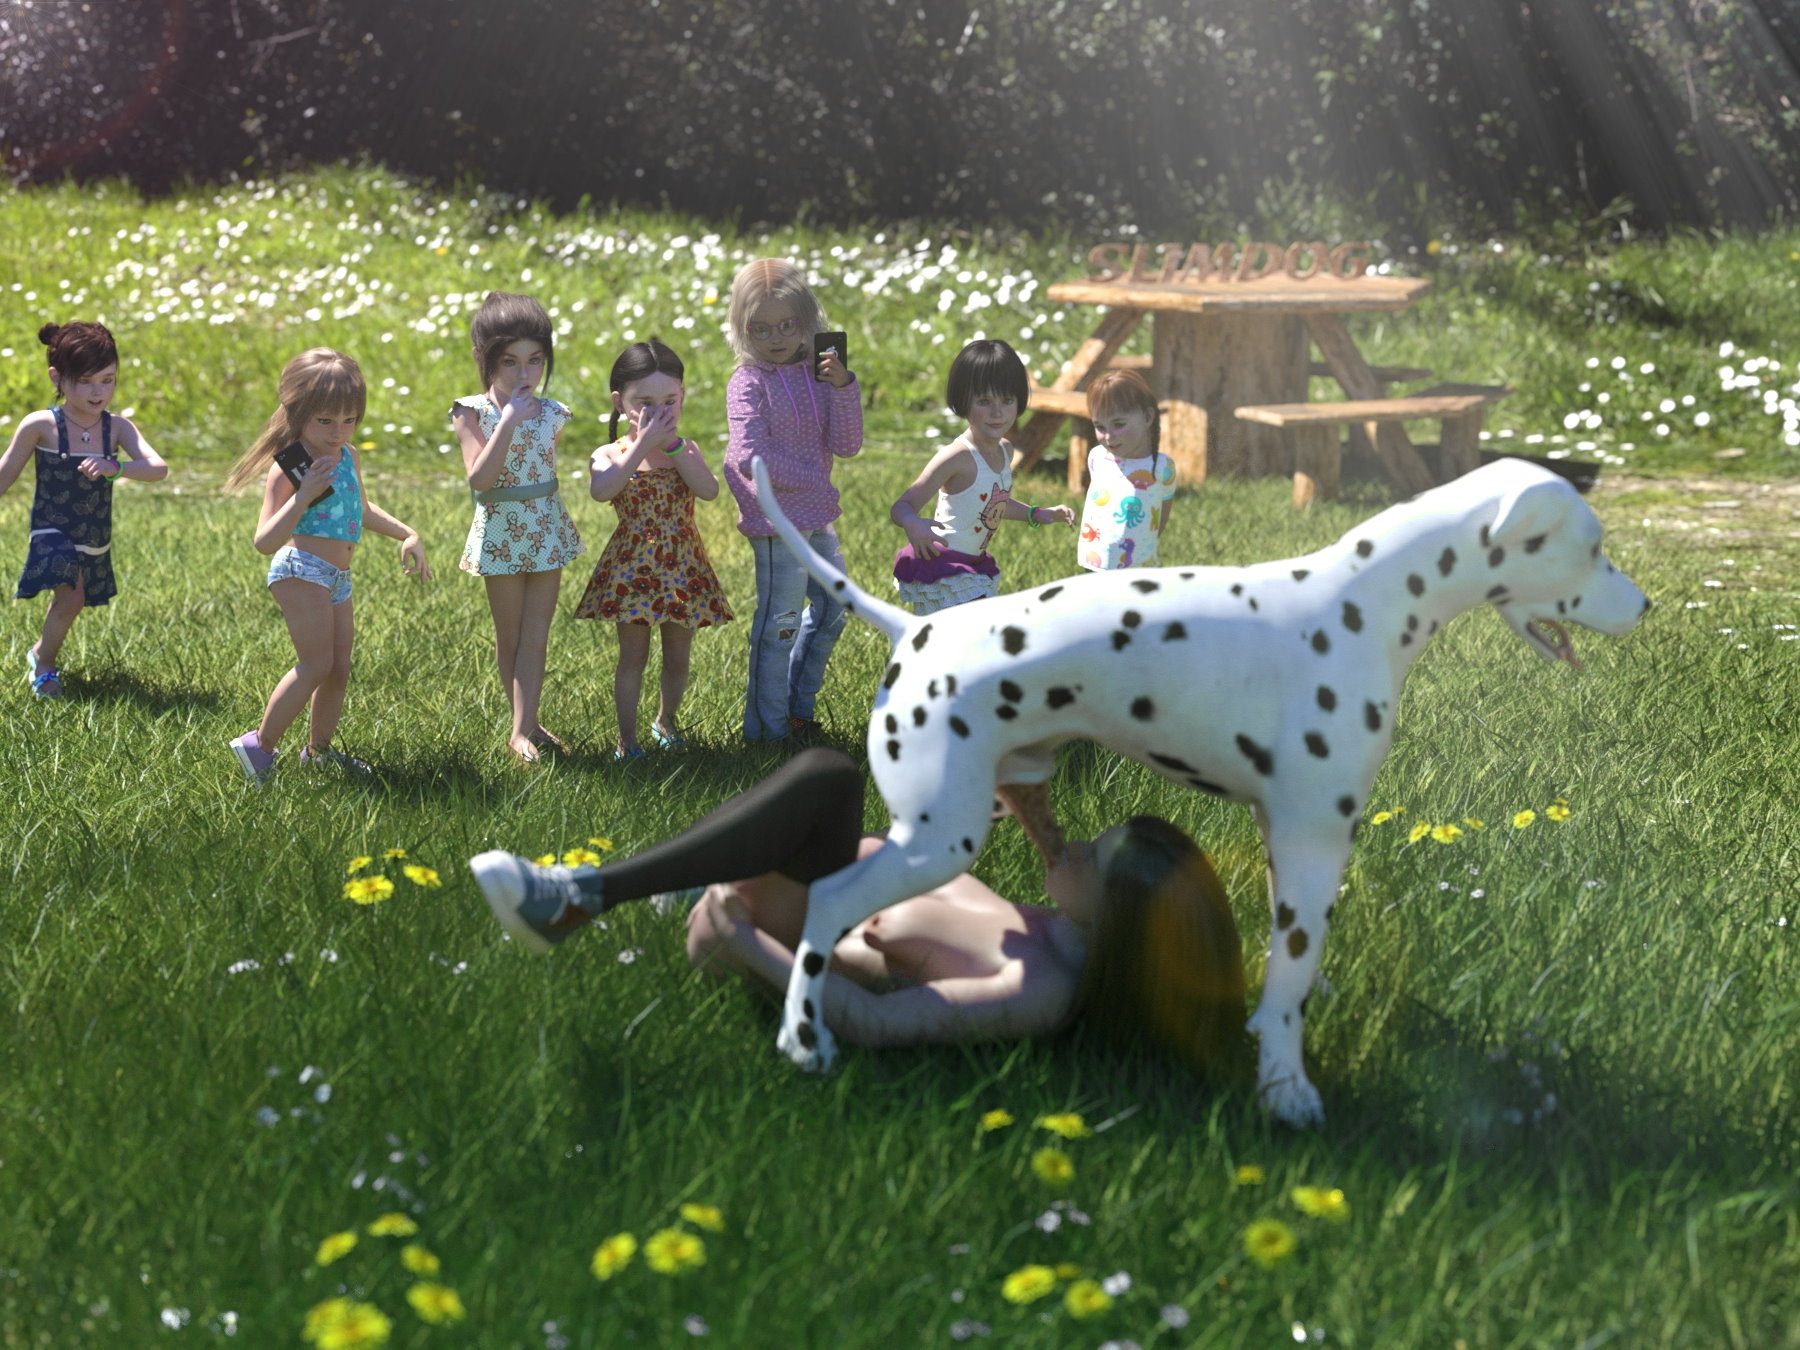 Hot 3D work from the master toddlercon Slimdog, a very cool rendering as we...